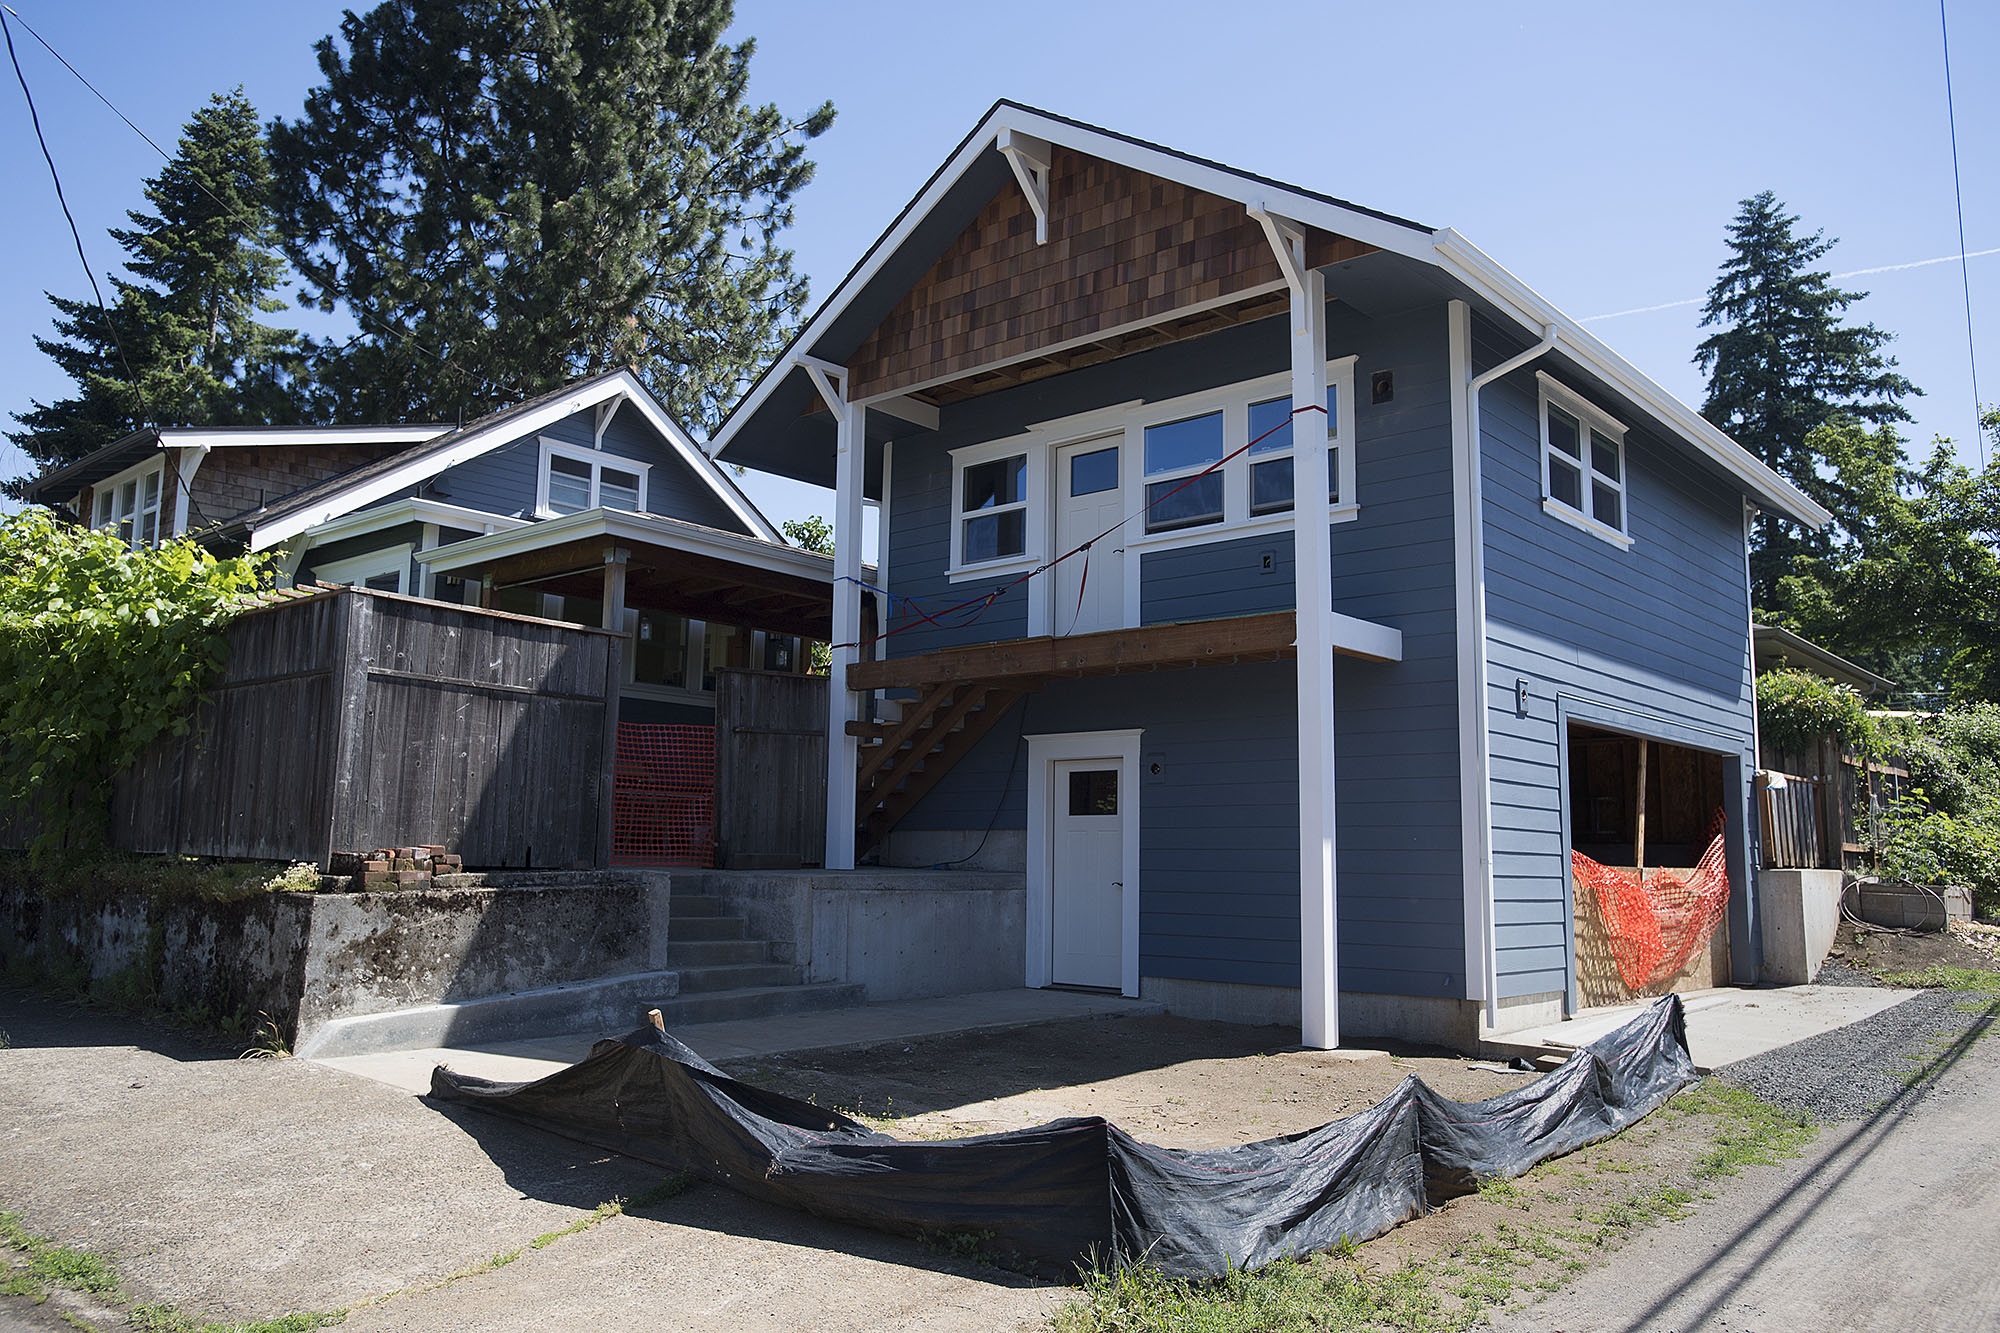 An accessory dwelling unit, right, under construction in June near a home in the Carter Park neighborhood. Vancouver, which recently revised its building code, has 65 ADUs, says Colete Anderson, a member of Clark County's planning staff. The county has allowed for ADUs since 1993, but the county has documented only 22 ADUs in the unincorporated Vancouver urban growth area, a county fact sheet says.